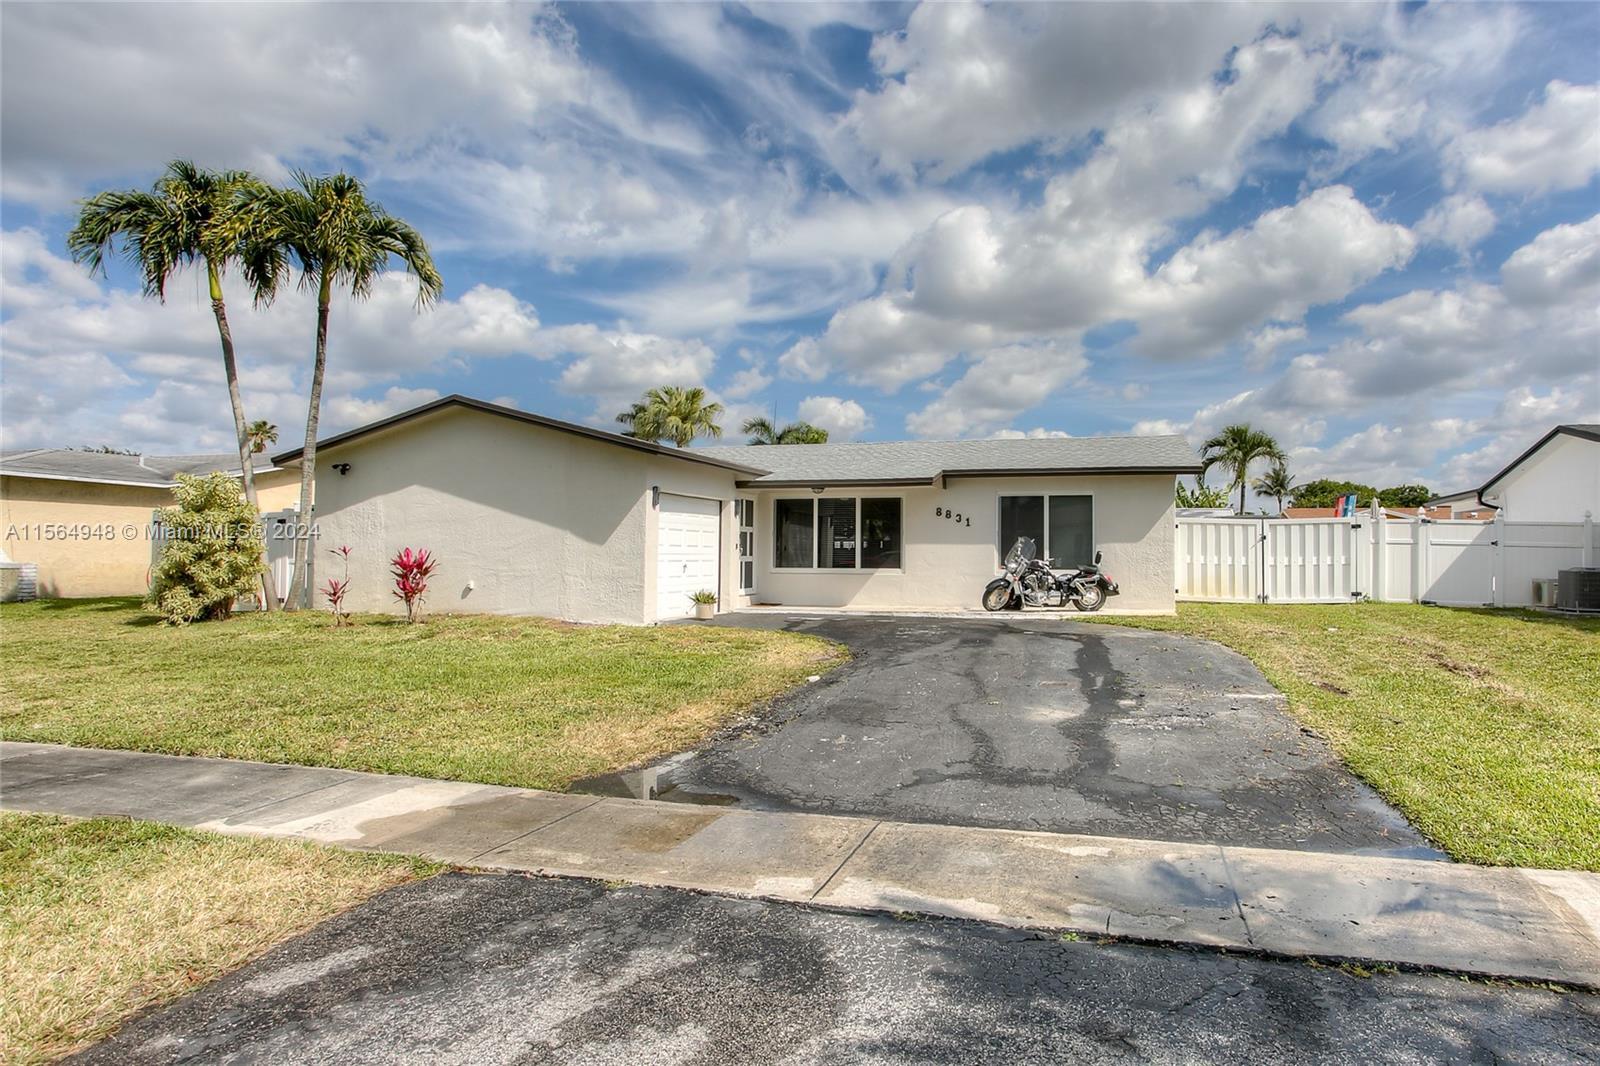 Photo of 8831 NW 7th St in Pembroke Pines, FL